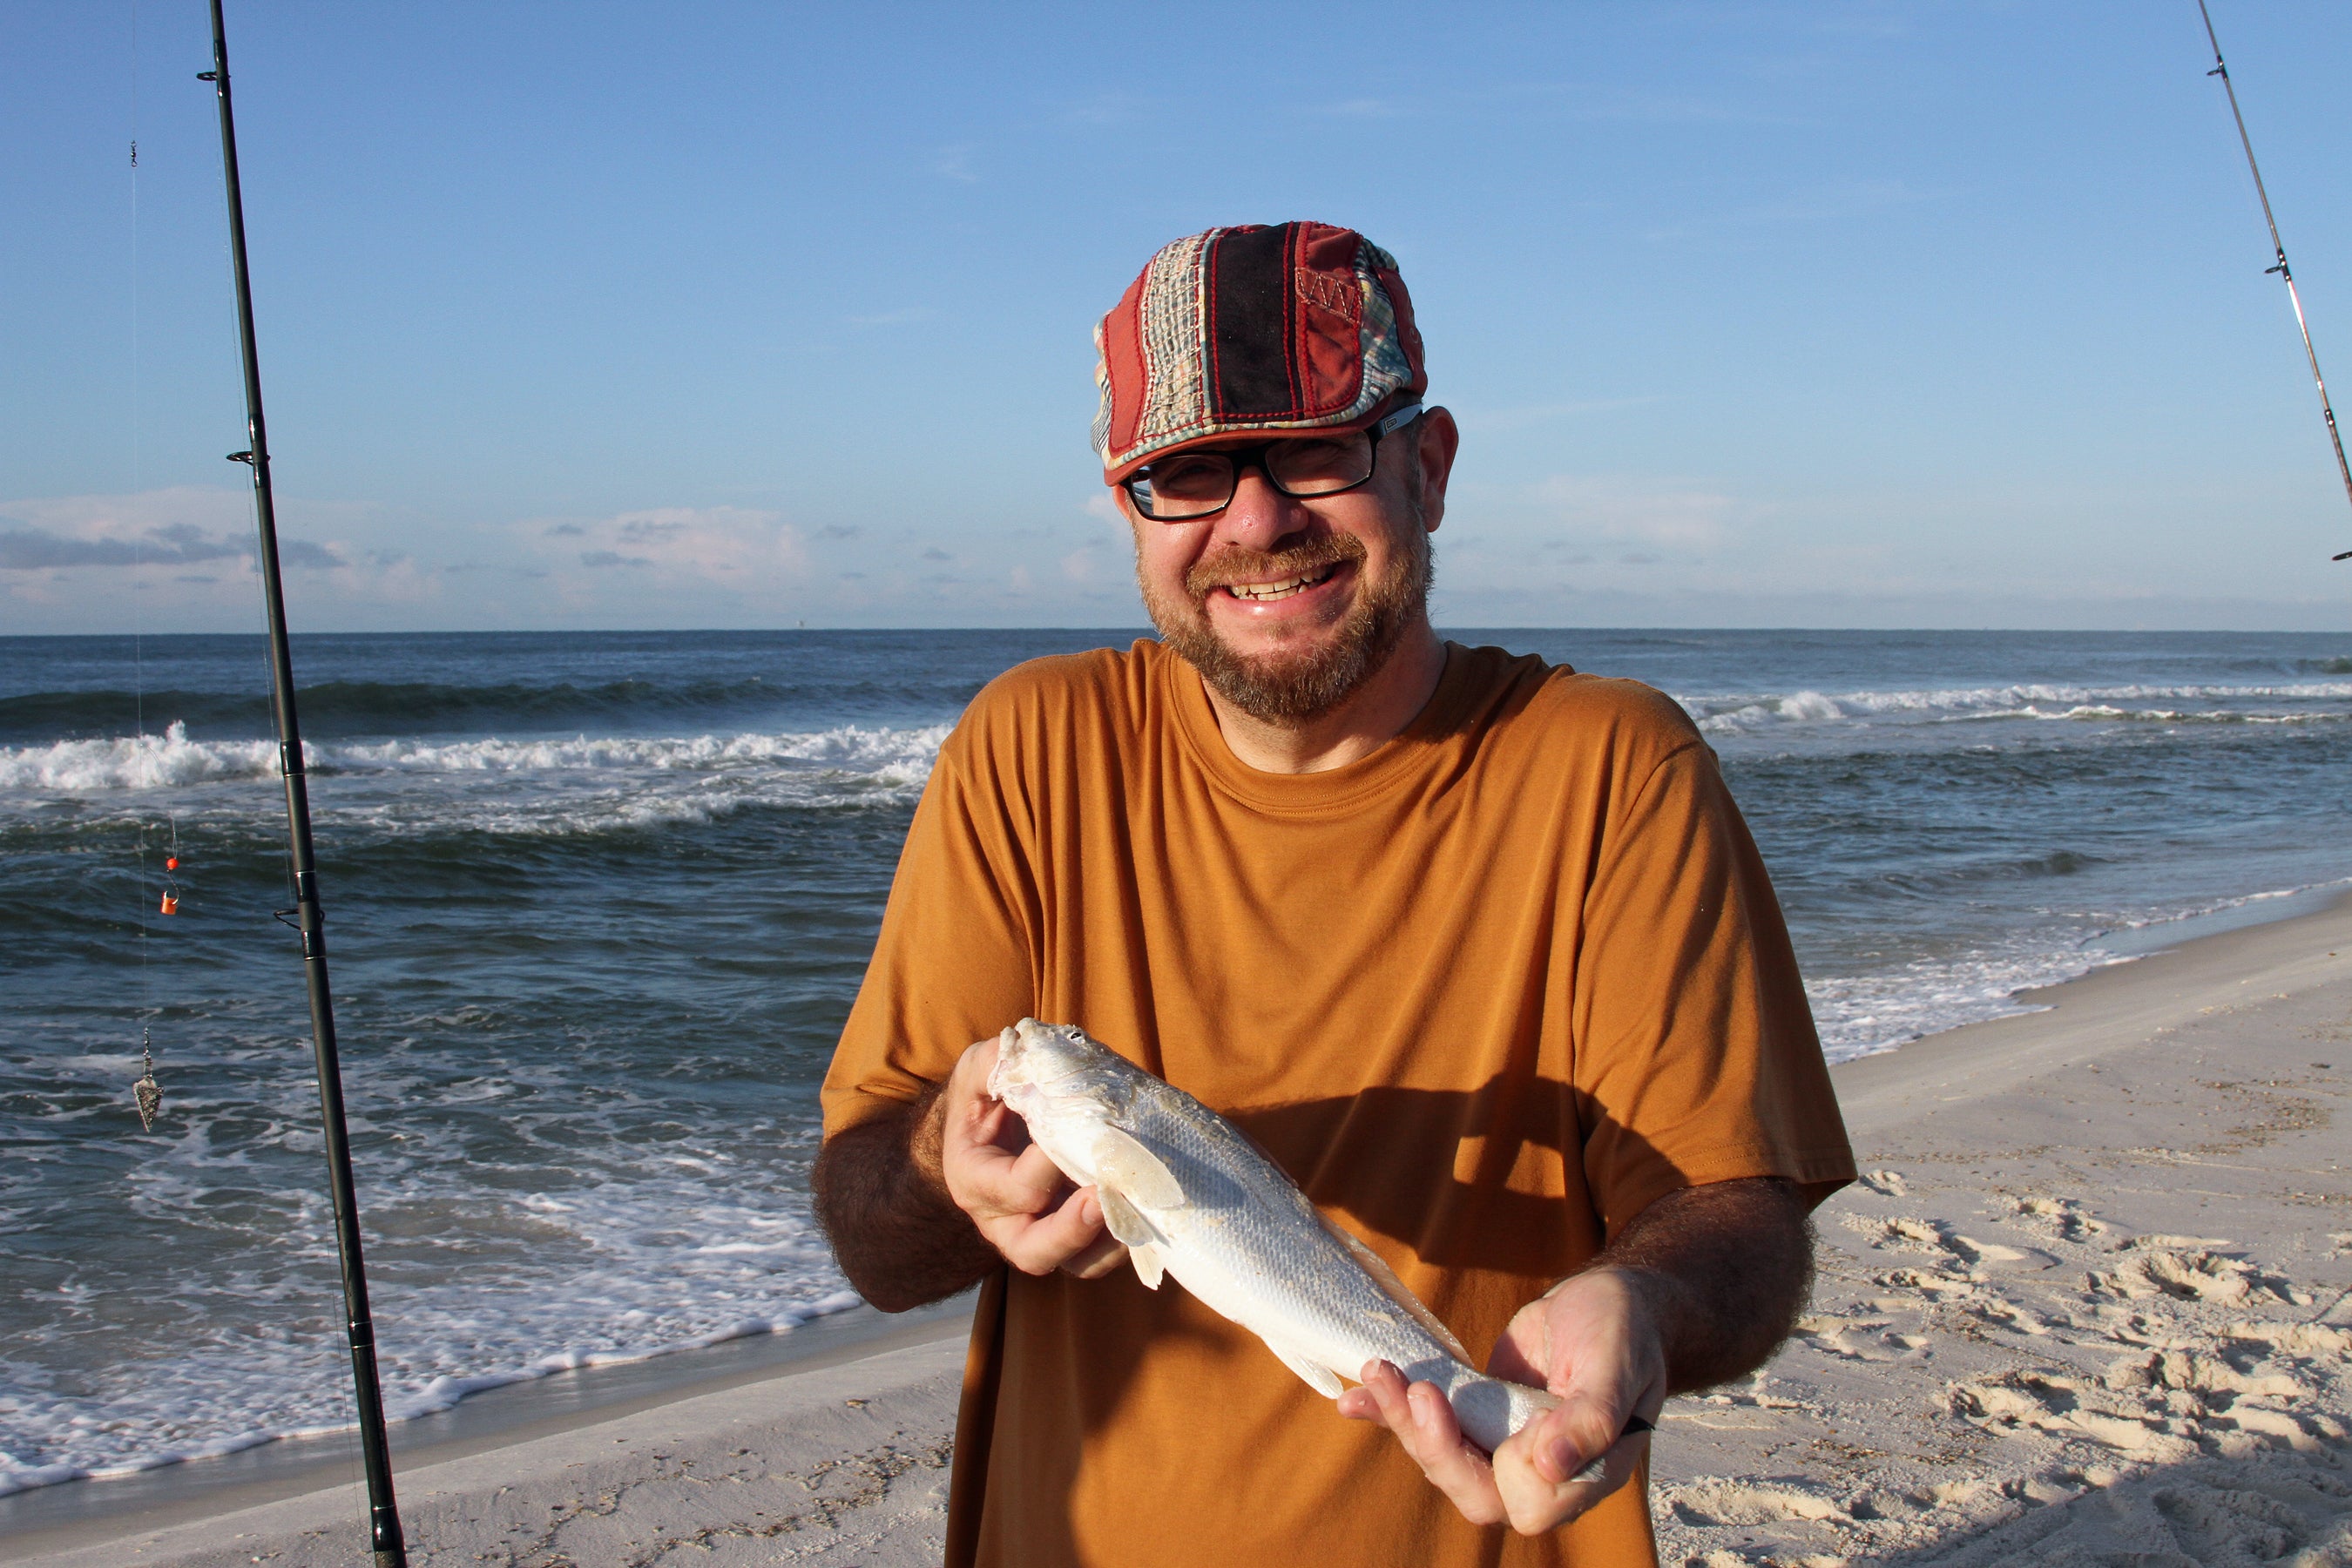 Surf Fishing Provides Isbell with New Vocation